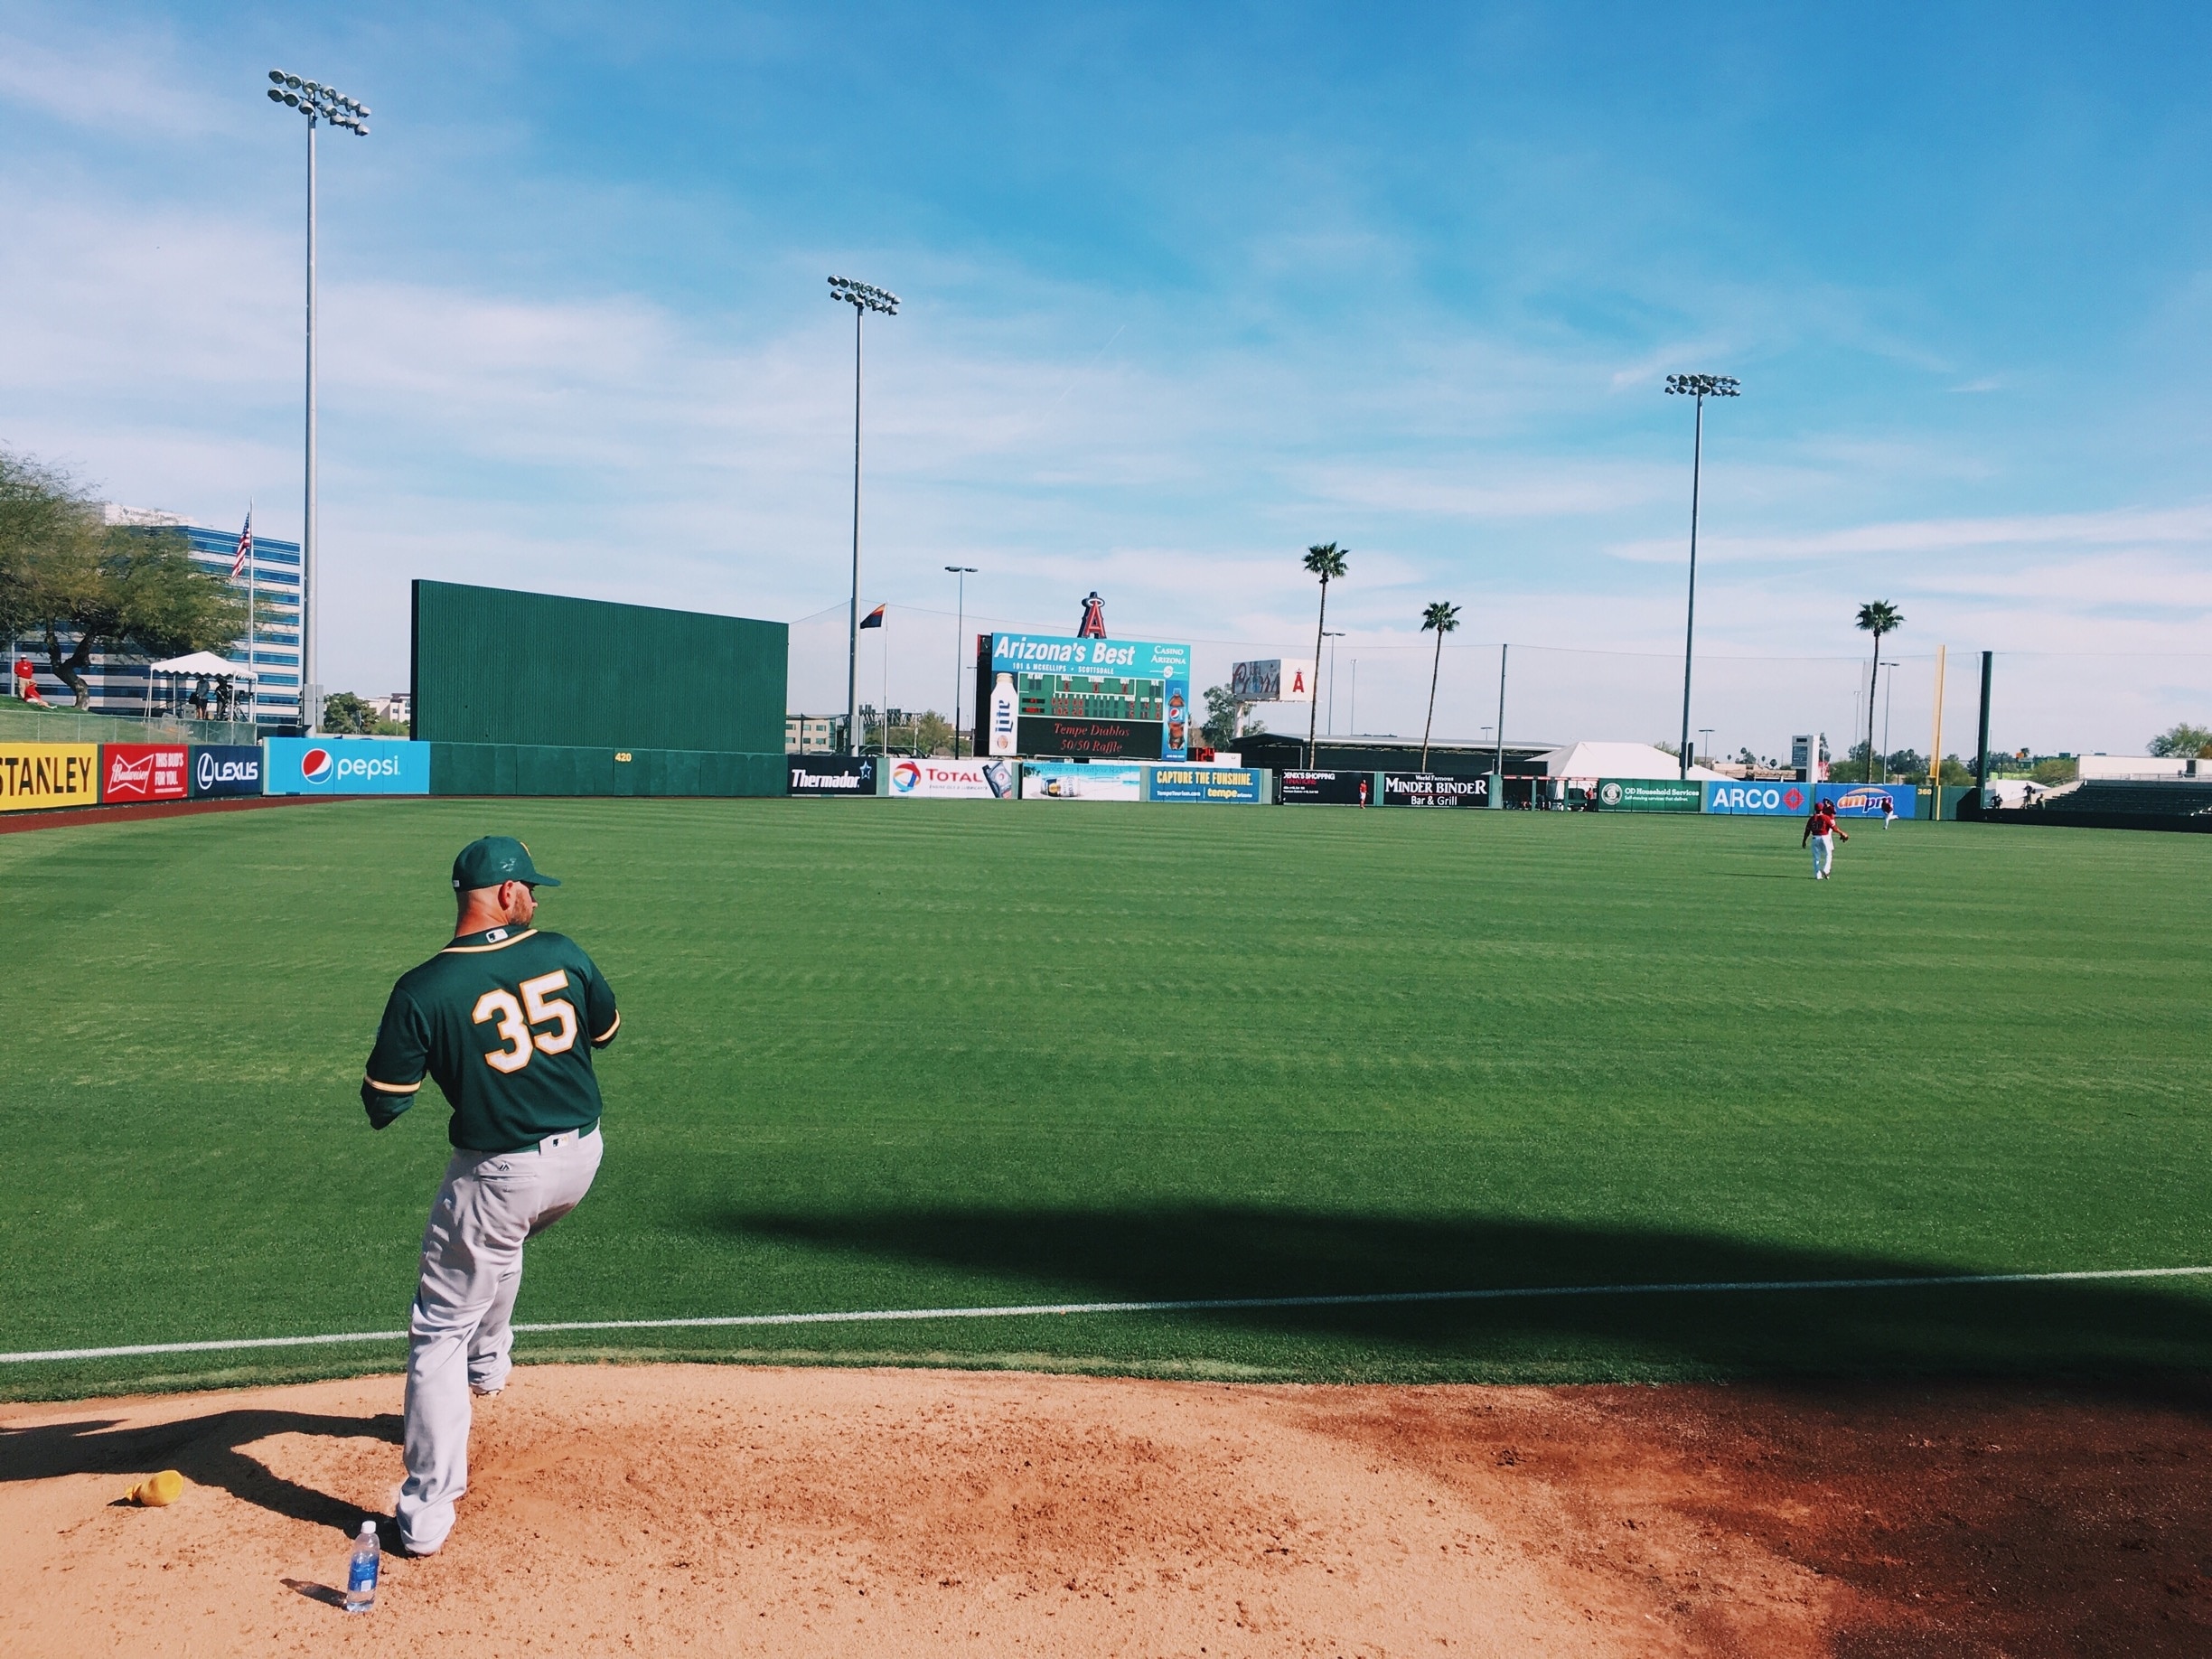 Get close to the dugout of the away team pitchers at the Angles spring training stadium.